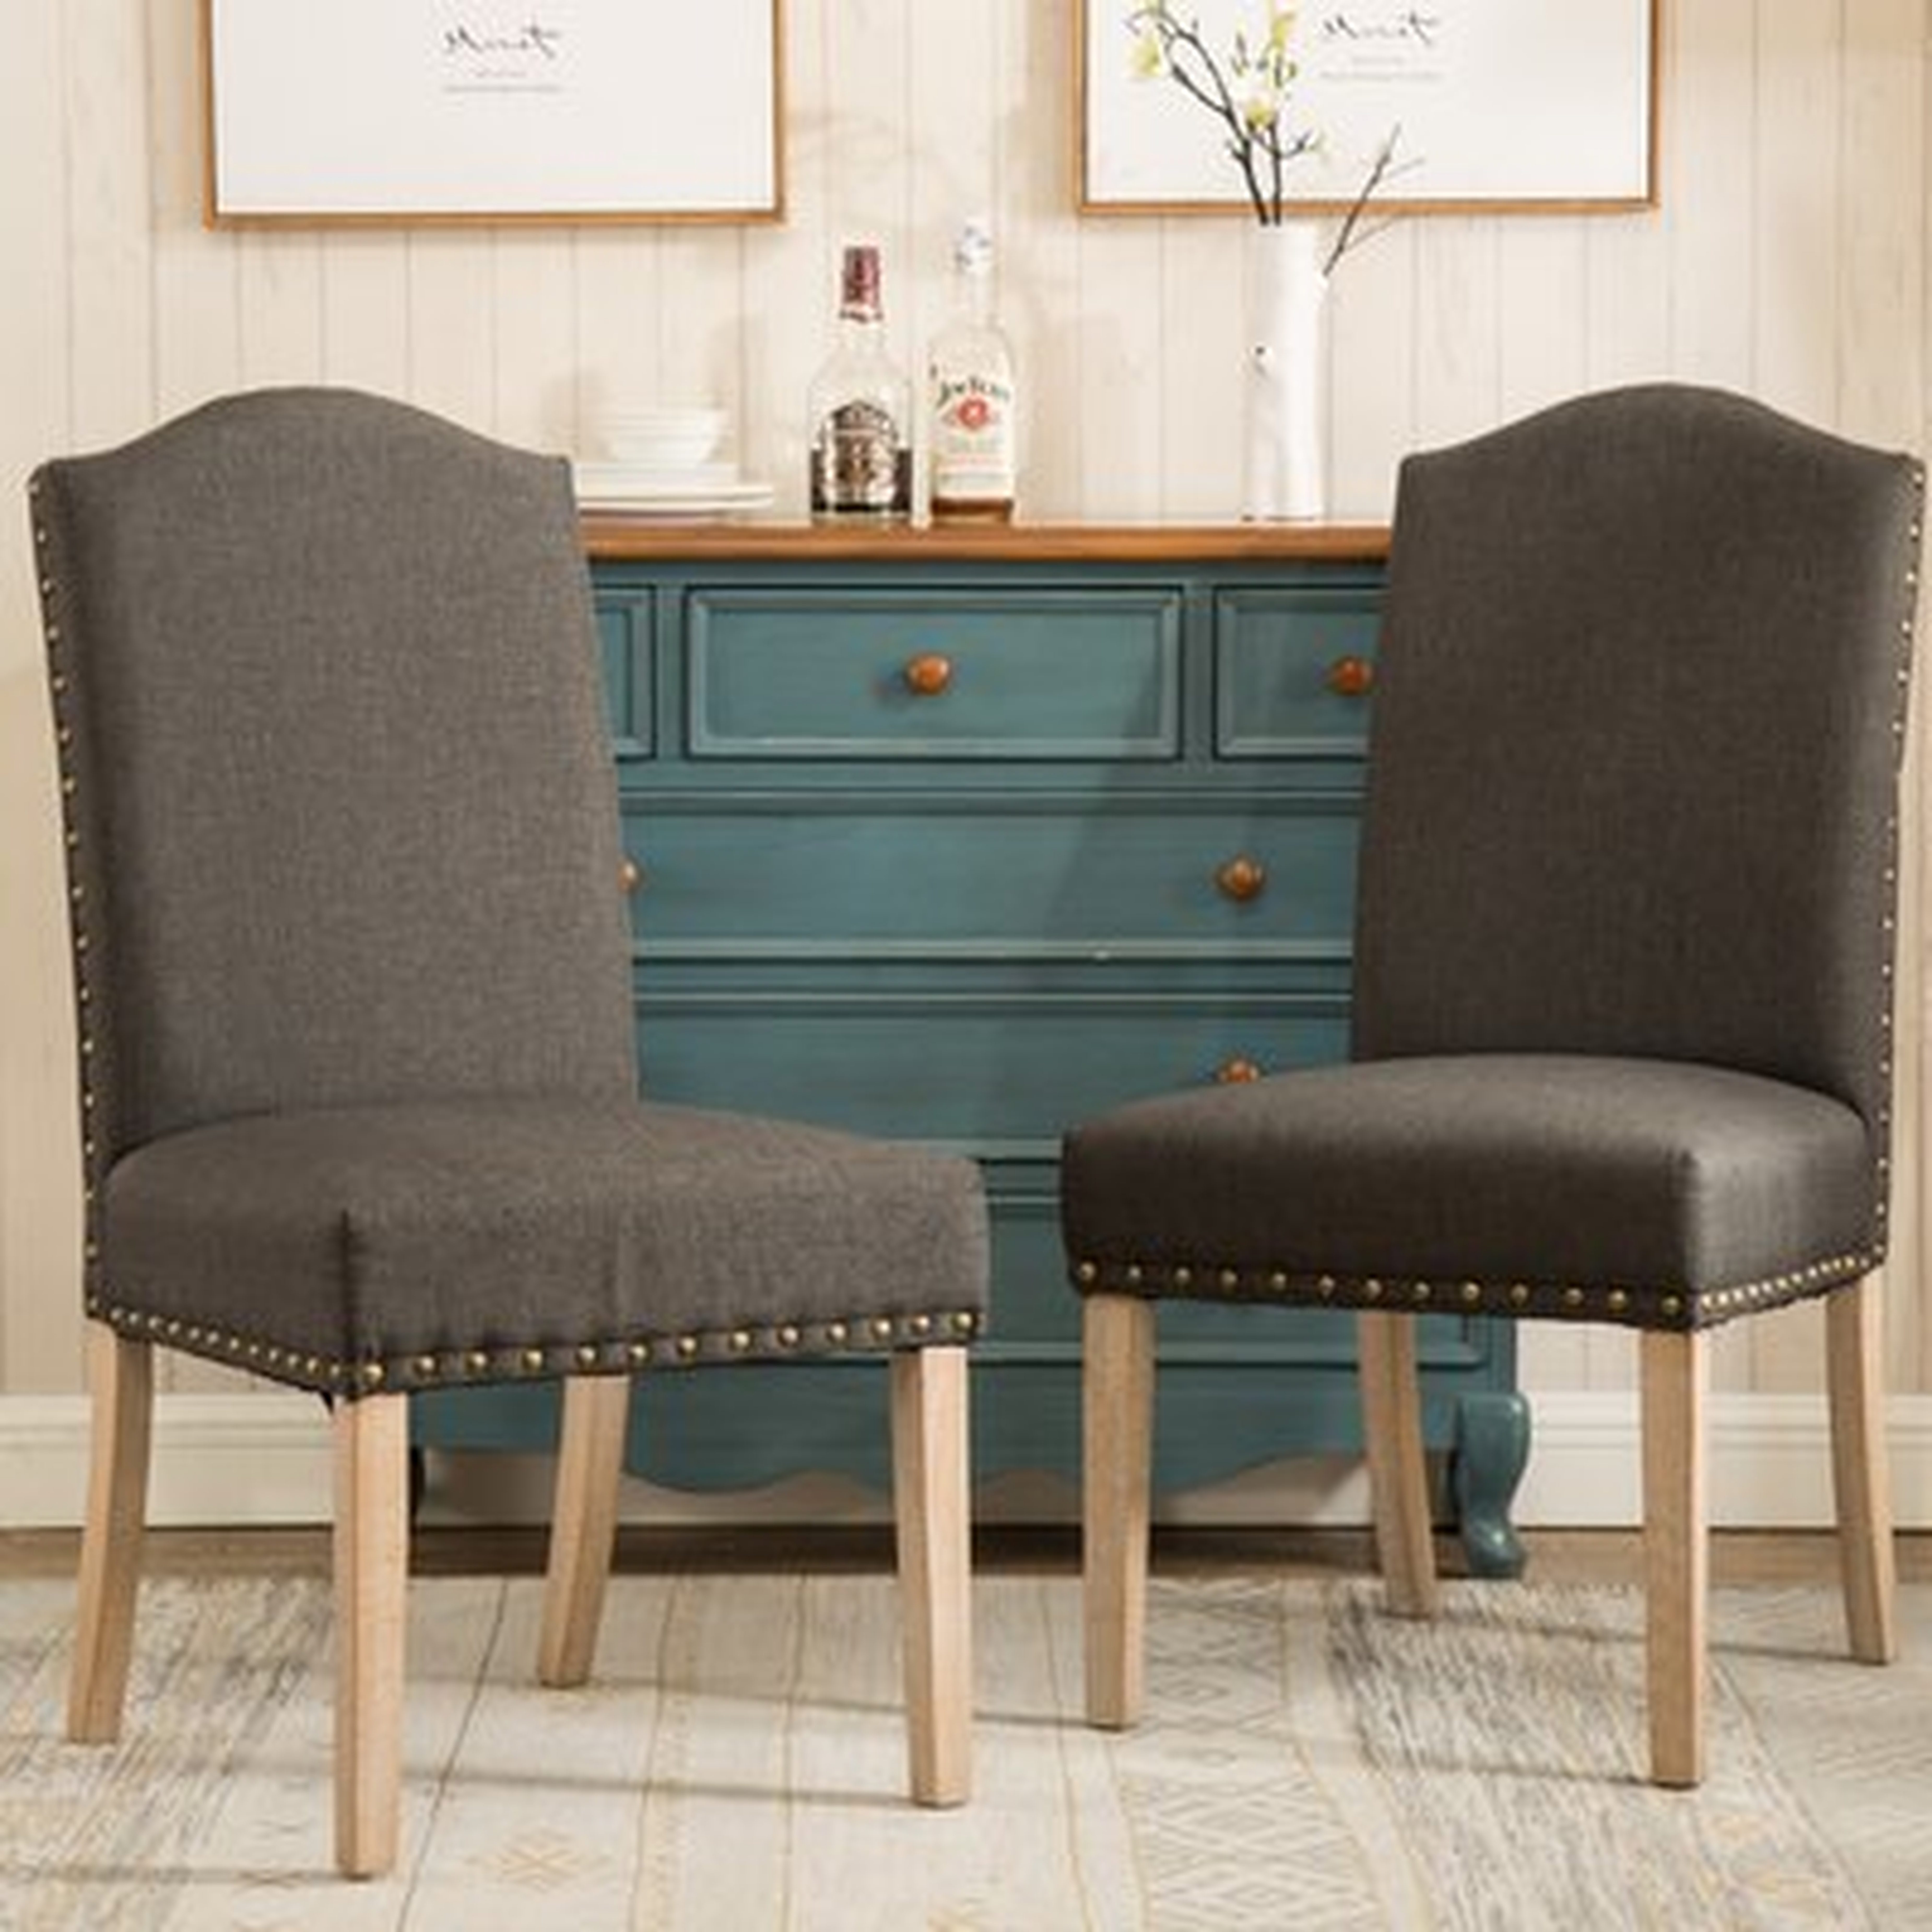 Isla Upholstered Dining Chairs - set of 2 - Birch Lane